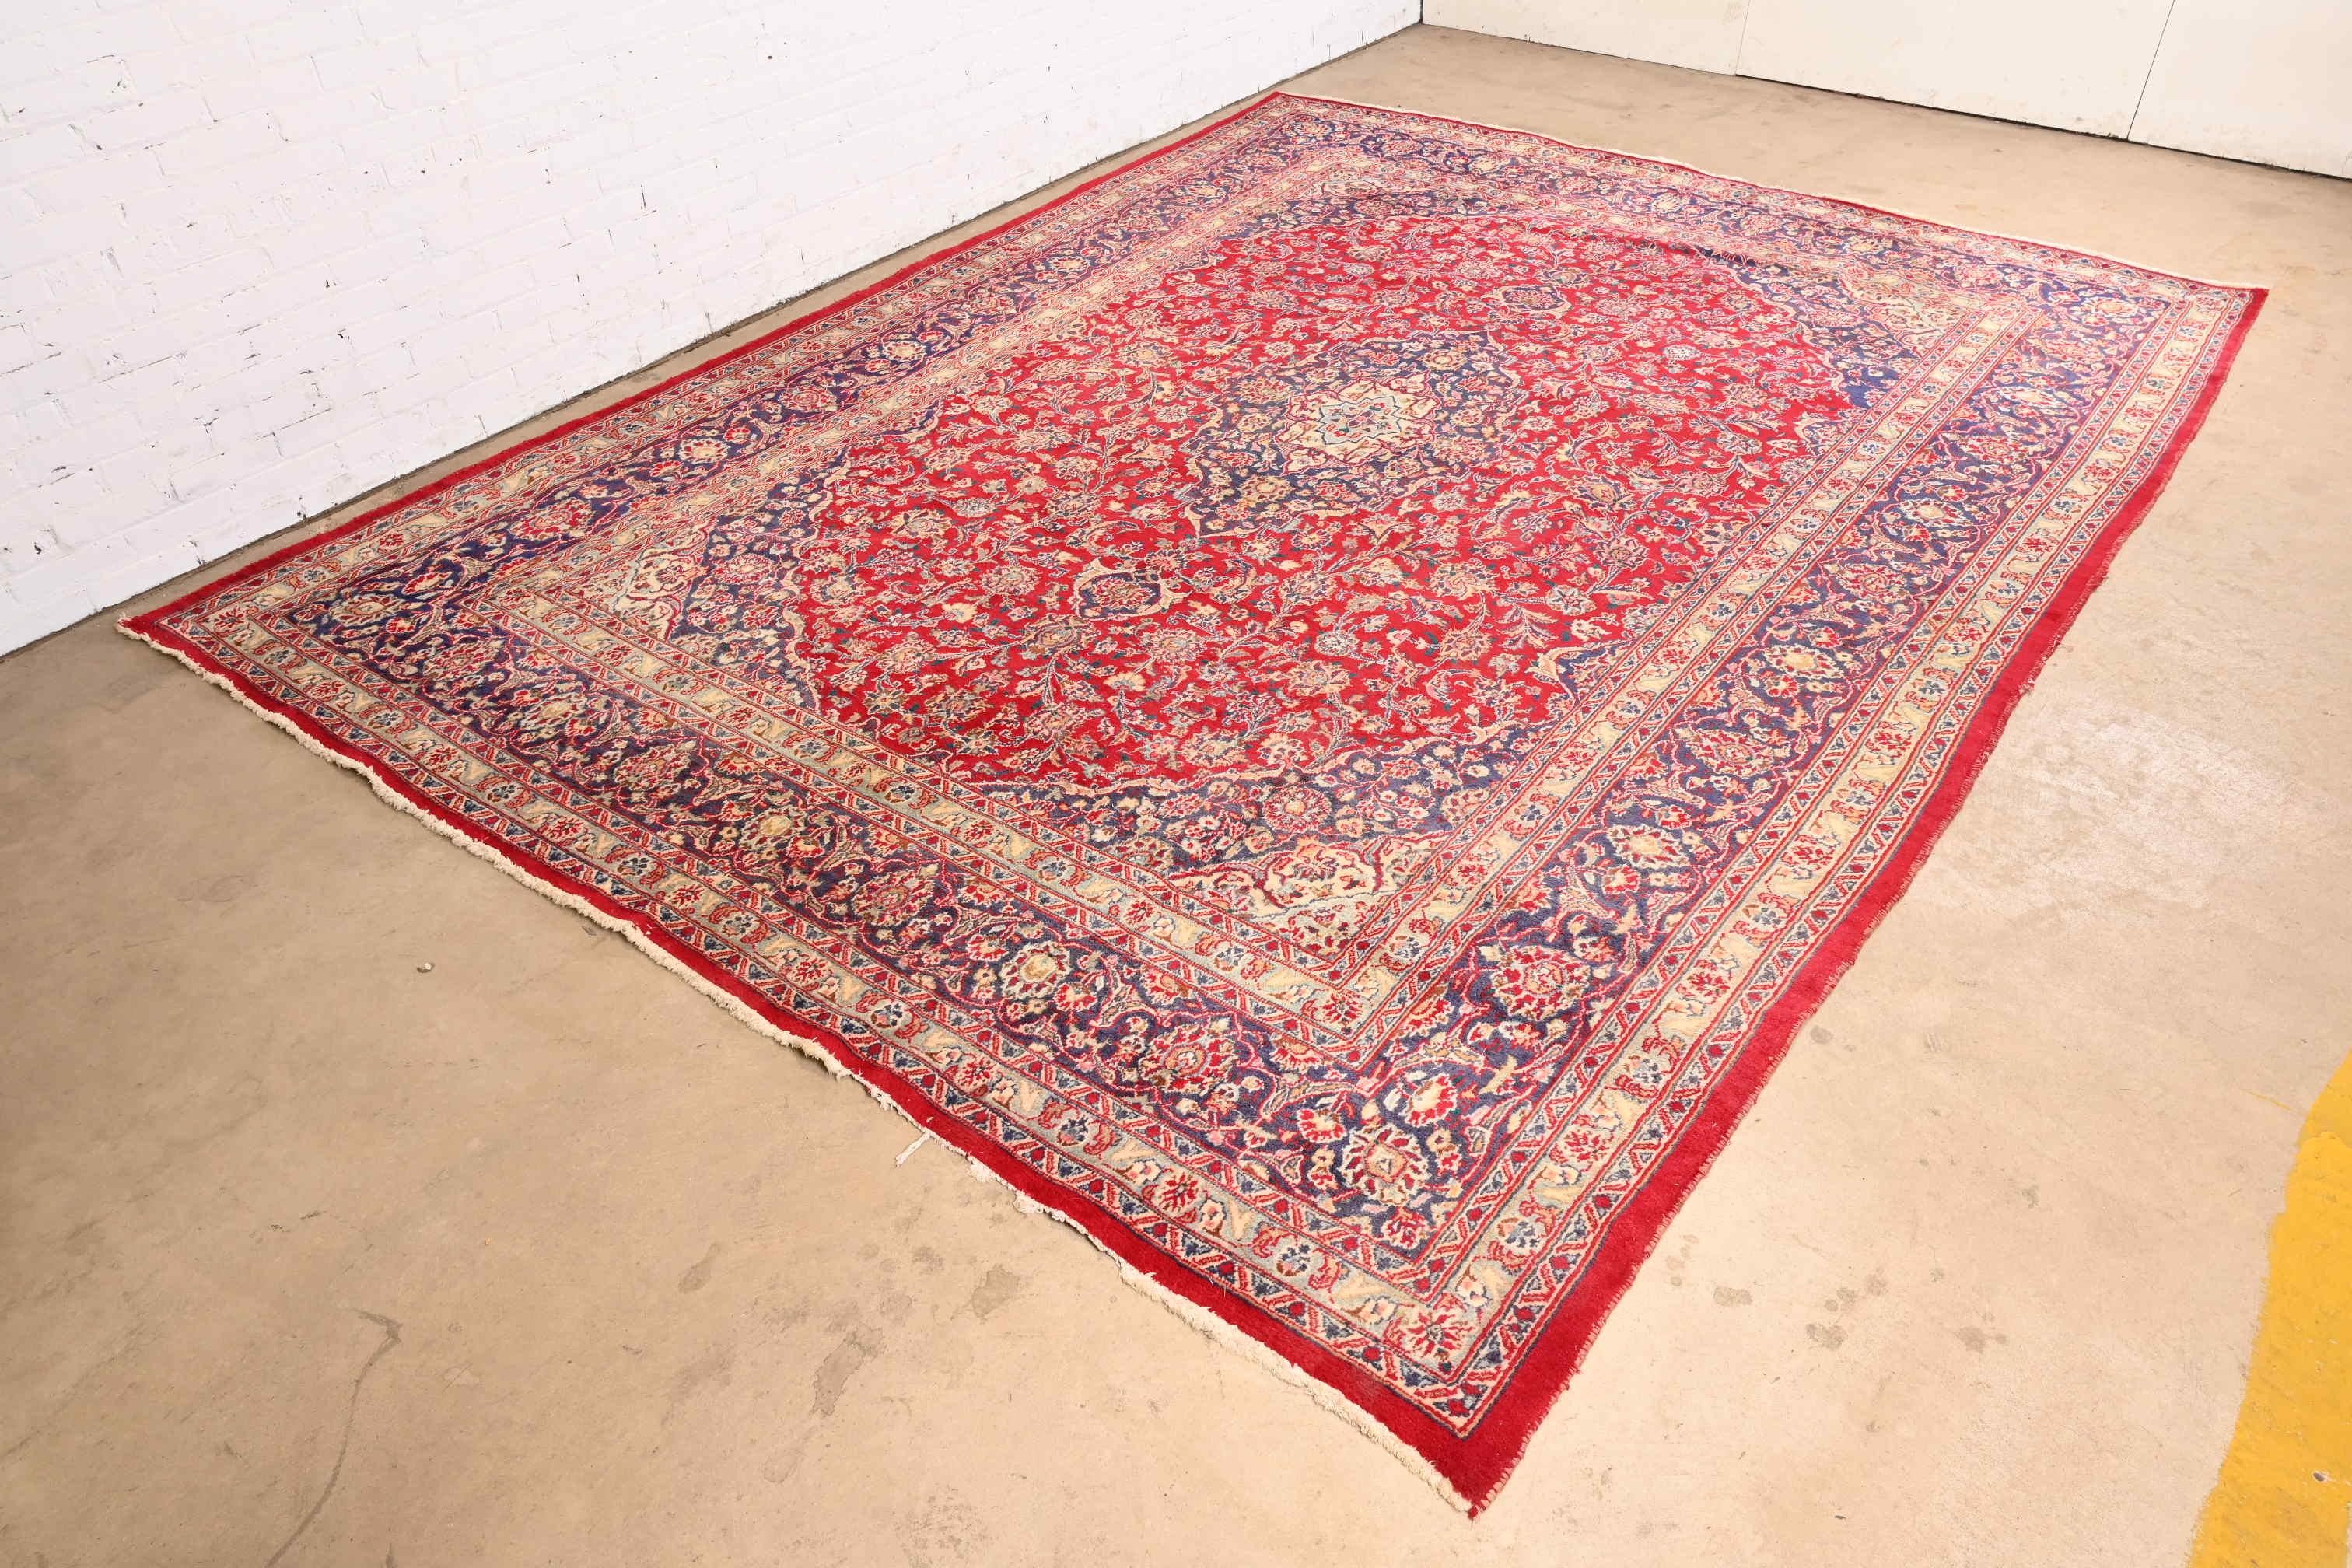 Vintage Hand-Knotted Persian Kashan Room Size Rug In Good Condition For Sale In South Bend, IN